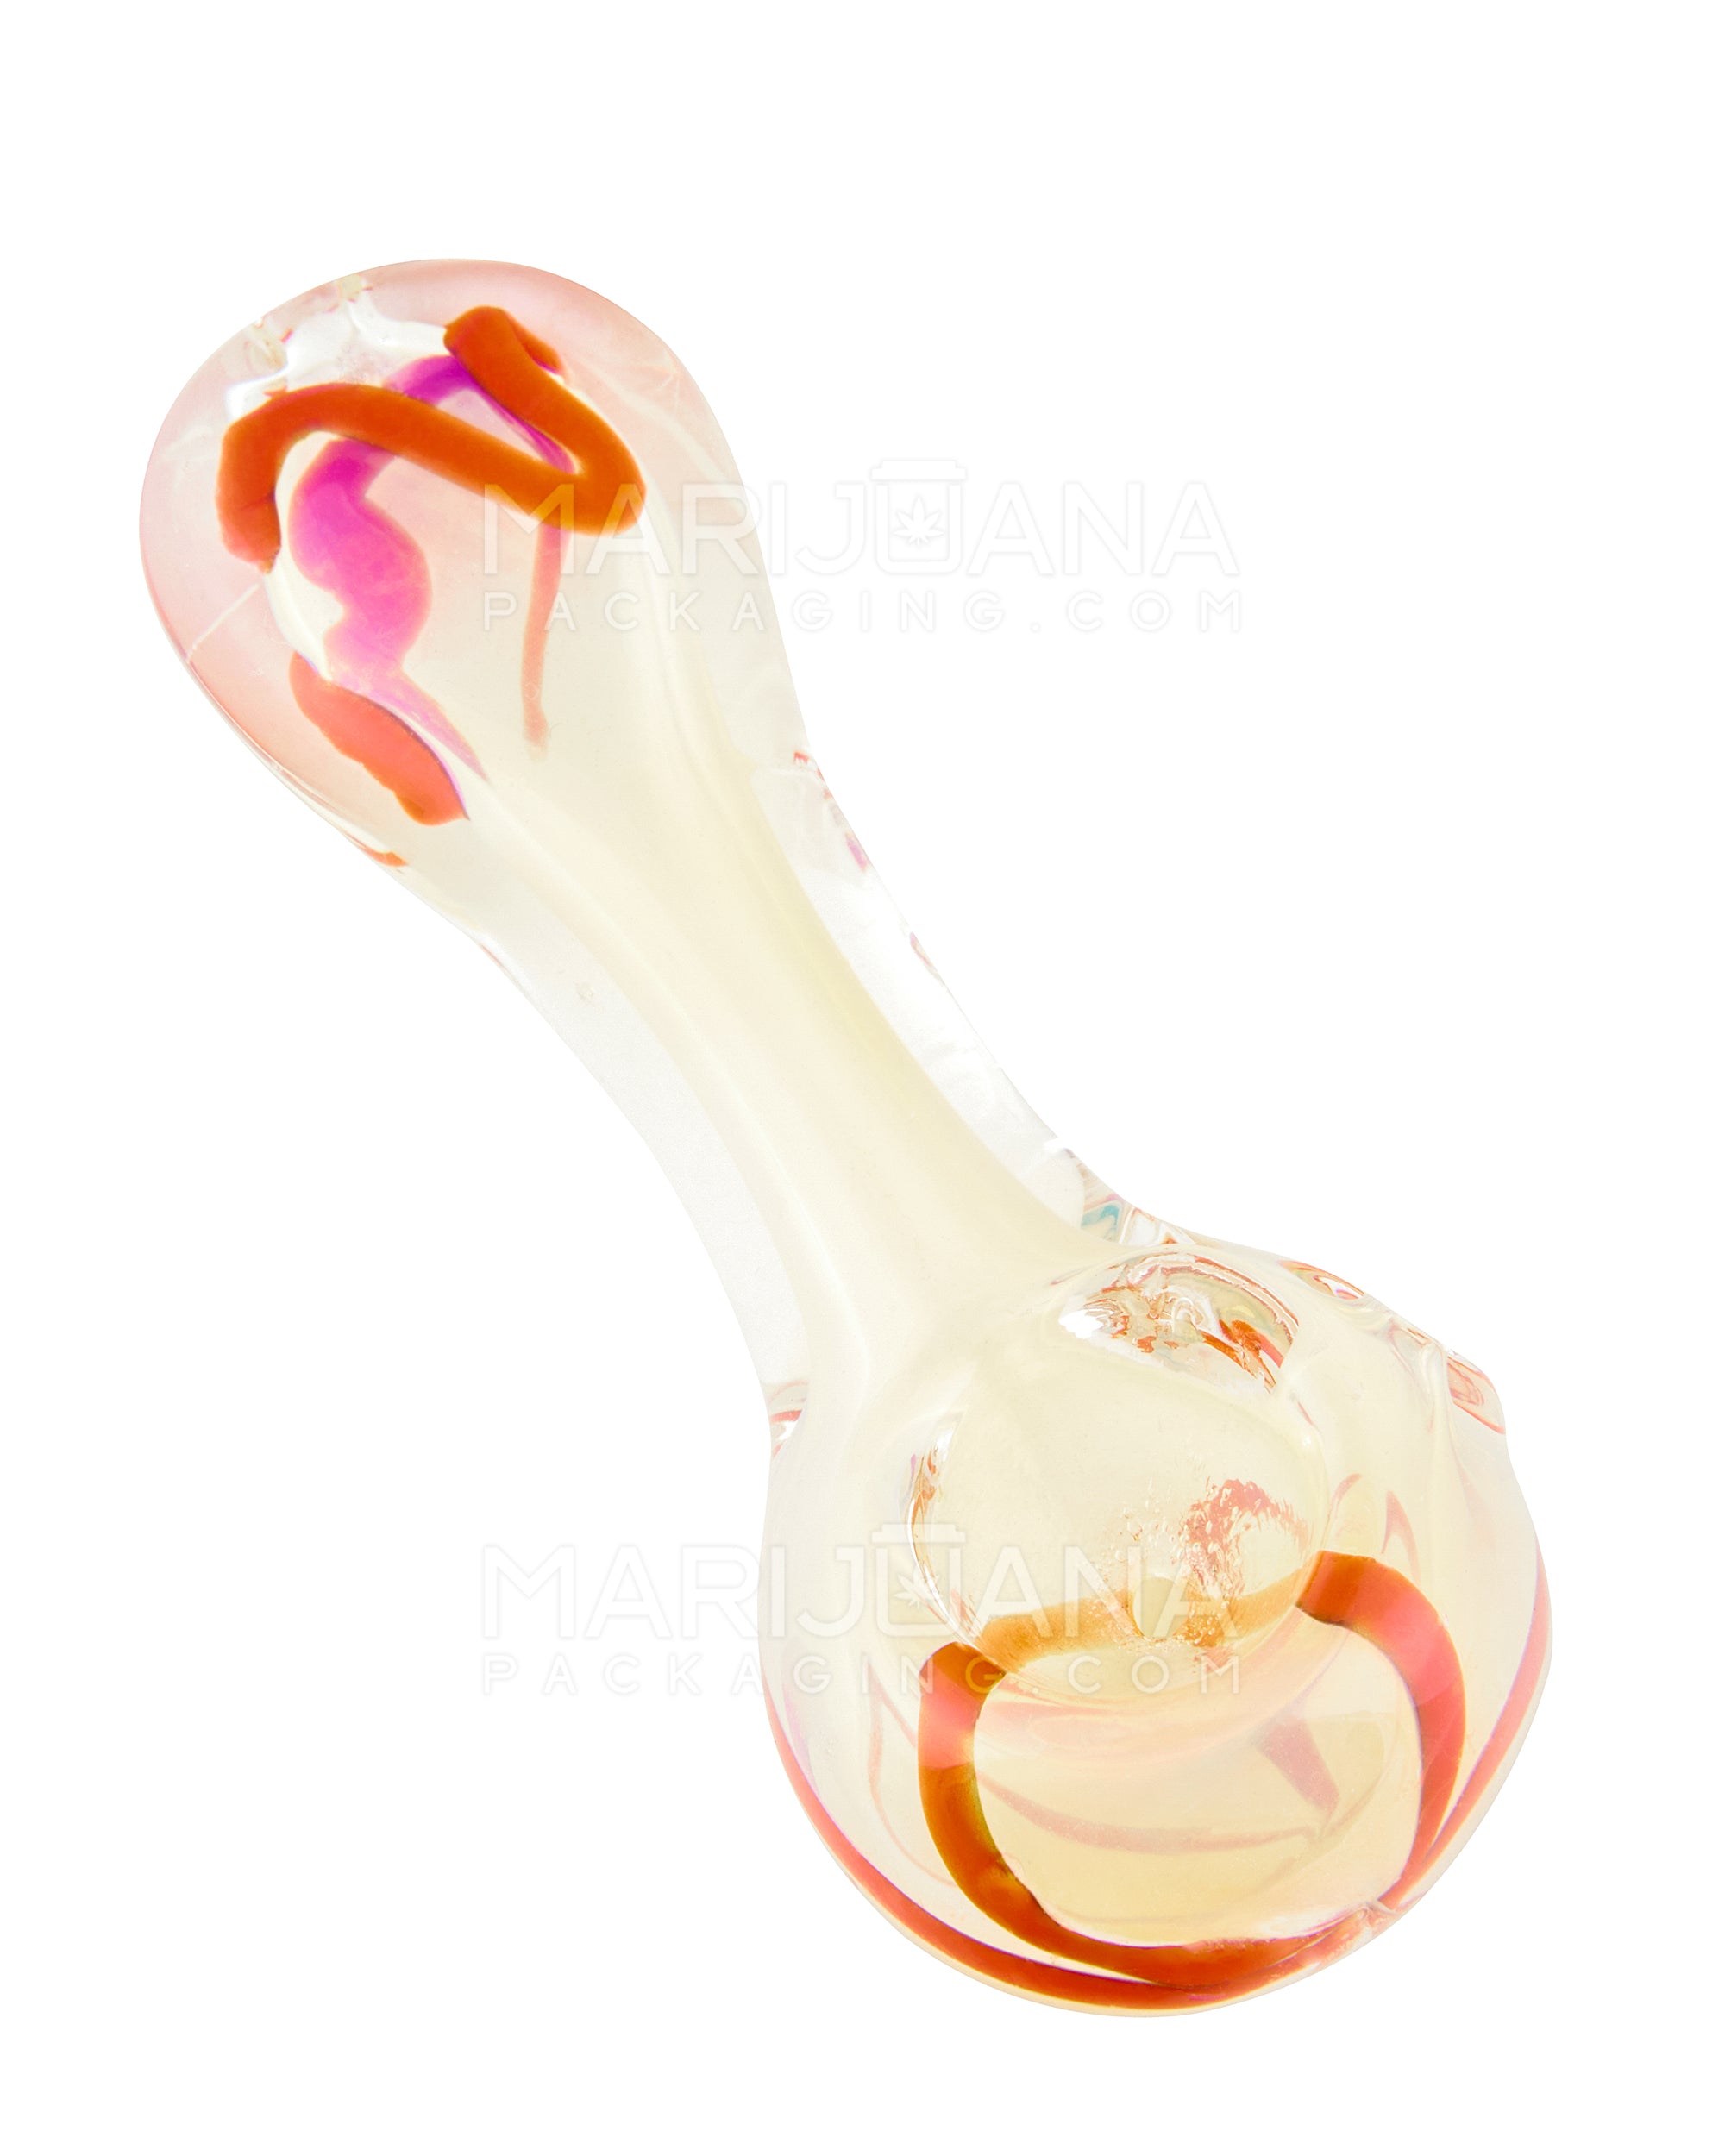 Frit & Gold Fumed Ridged Spoon Hand Pipe w/ Stripes | 3.5in Long - Glass - Assorted